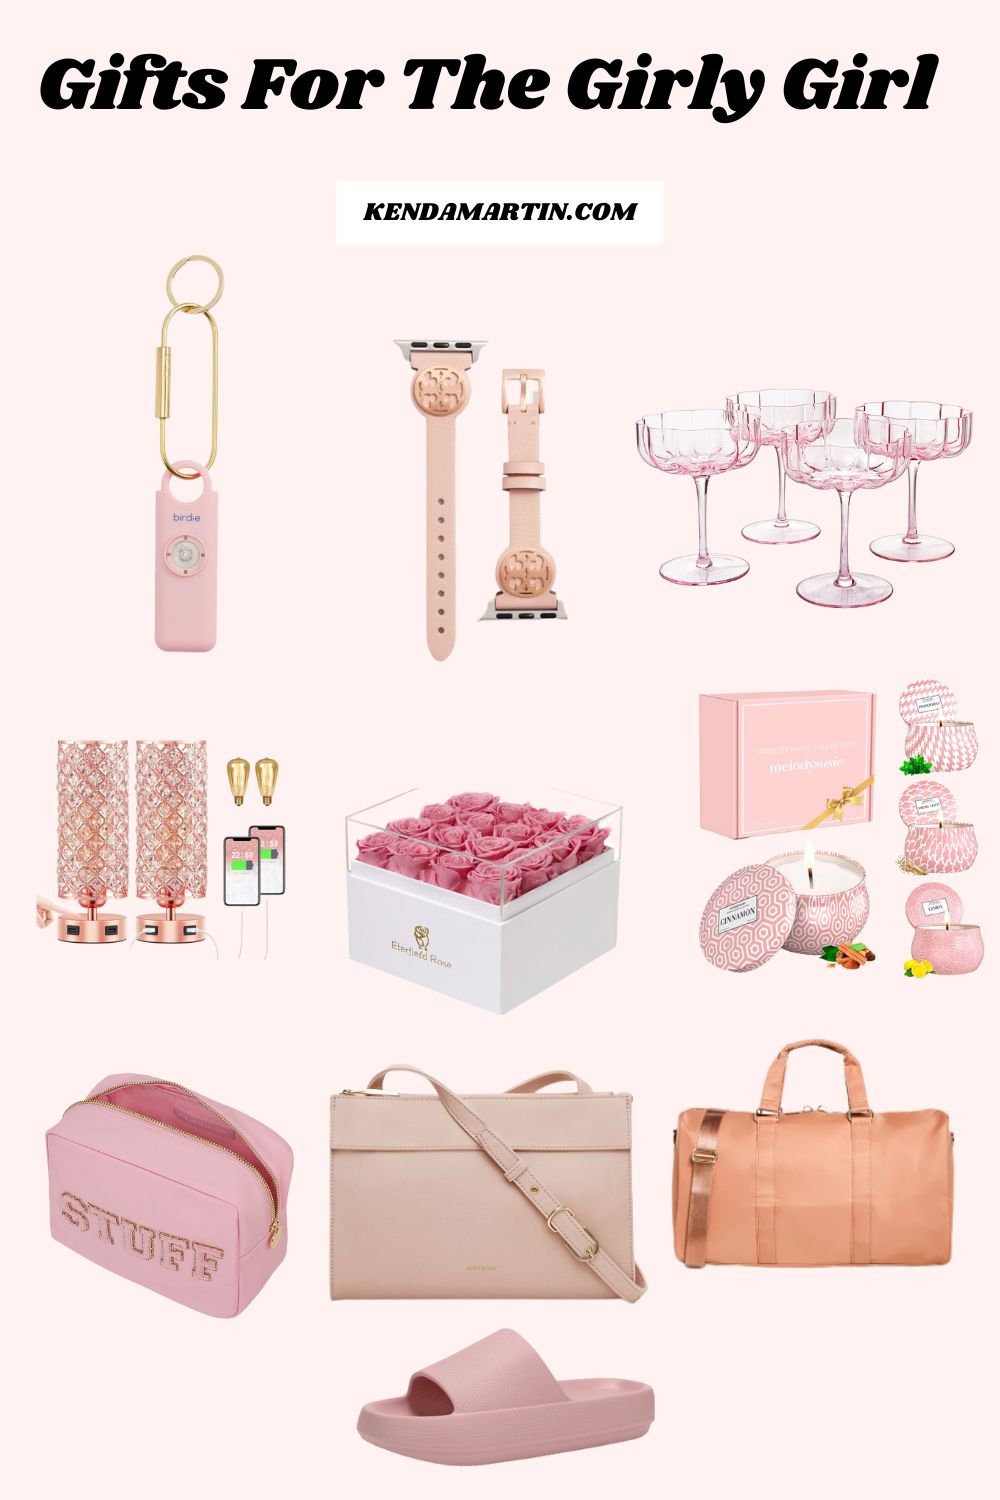 100 GIFTS FOR HER | 2022 GIFT GUIDE